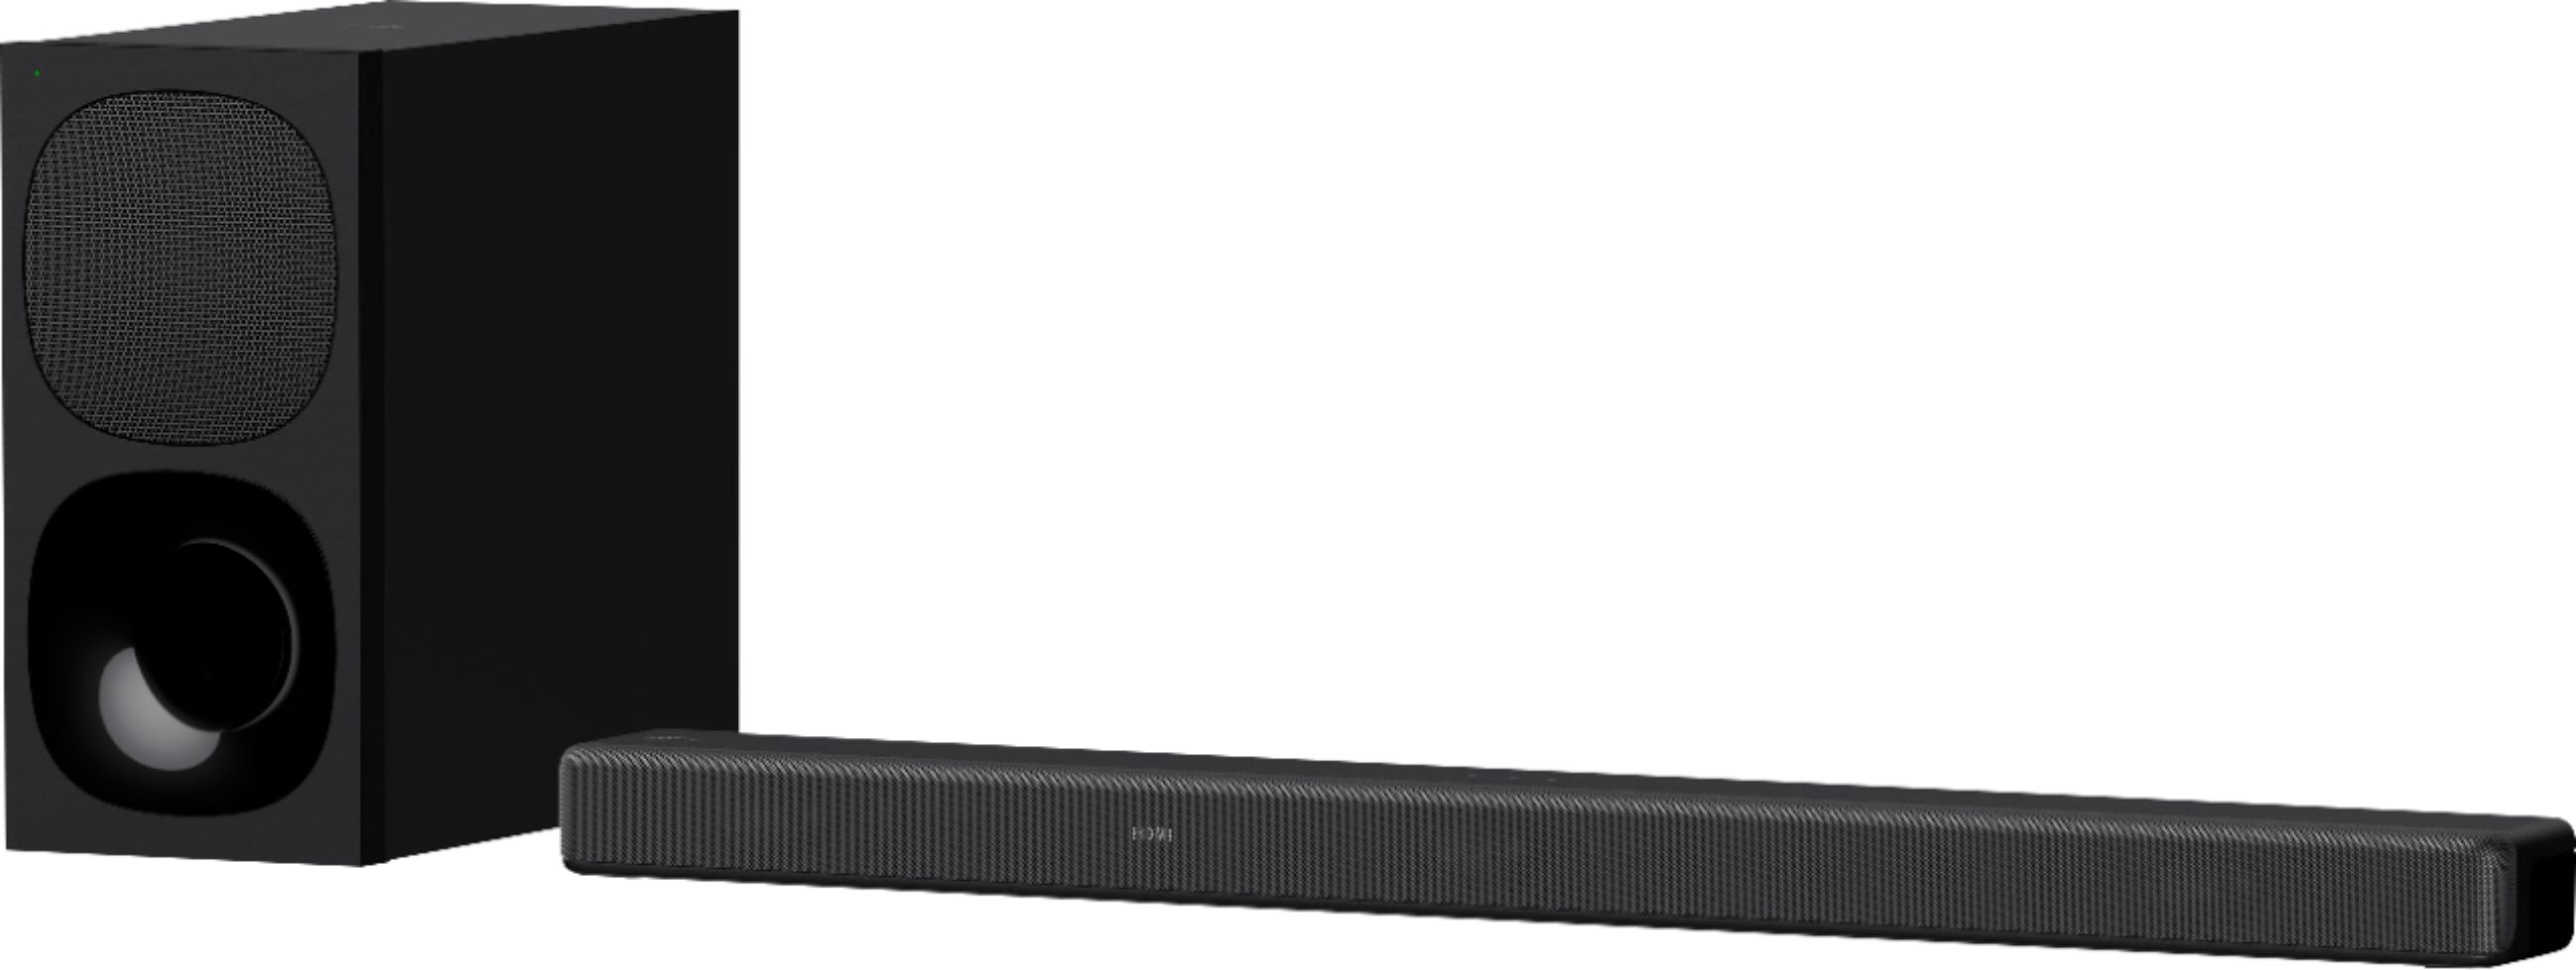 Best Buy: Sony HT-G700 and Soundbar 3.1 Channel Wireless Black Dolby with Atmos/DTS:X Subwoofer HTG700